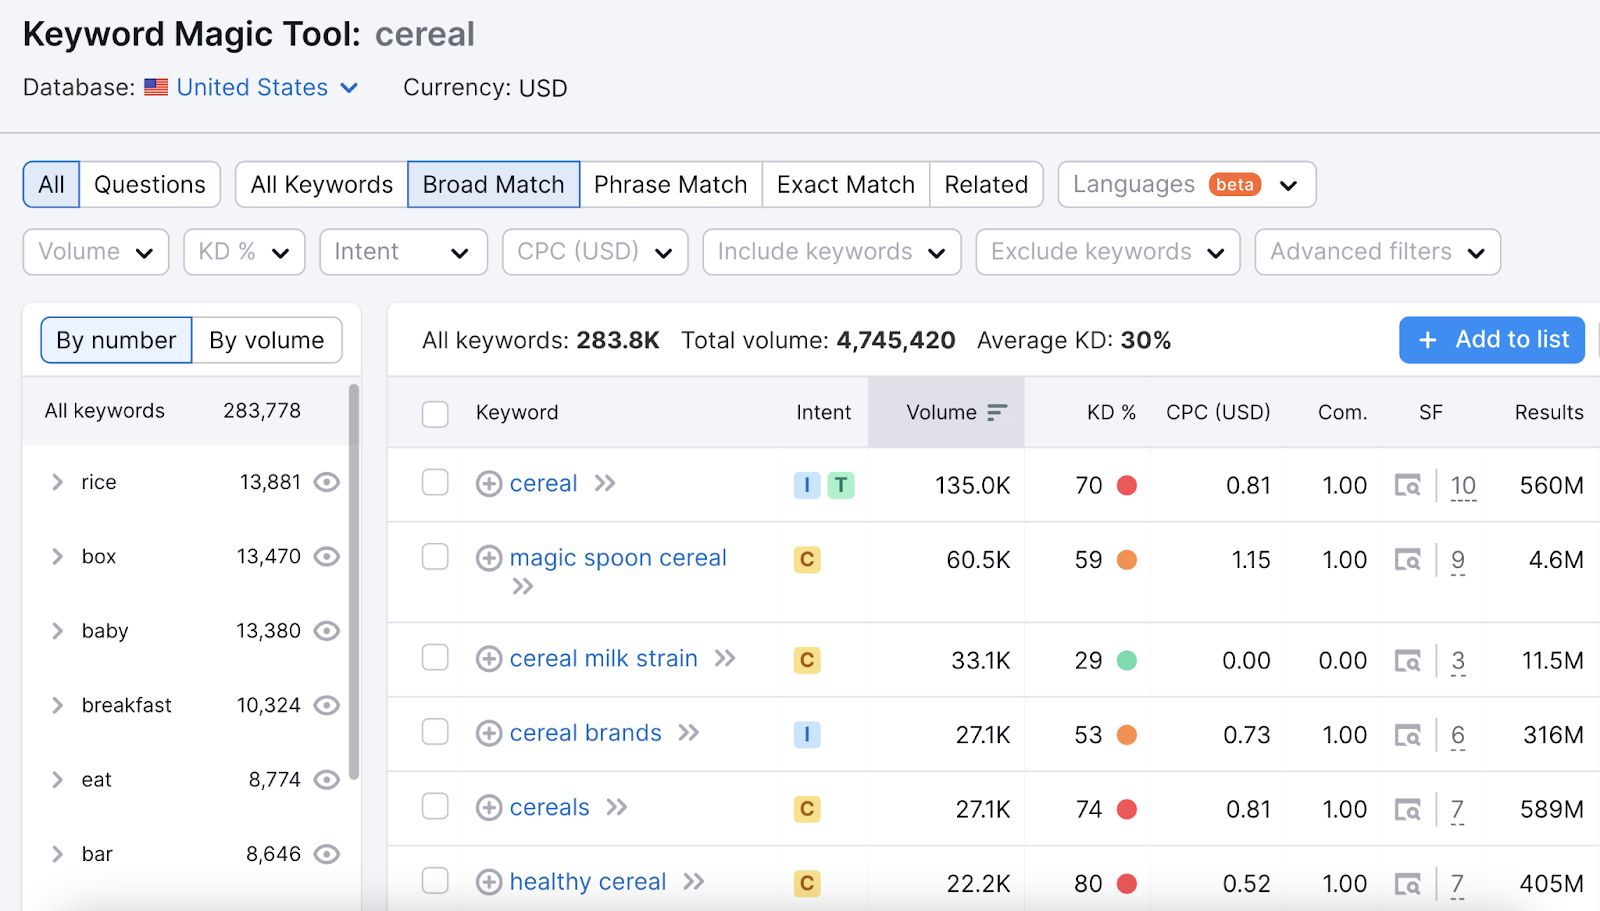 A list of related keywords to "cereal" seed keyword in Keyword Magic Tool